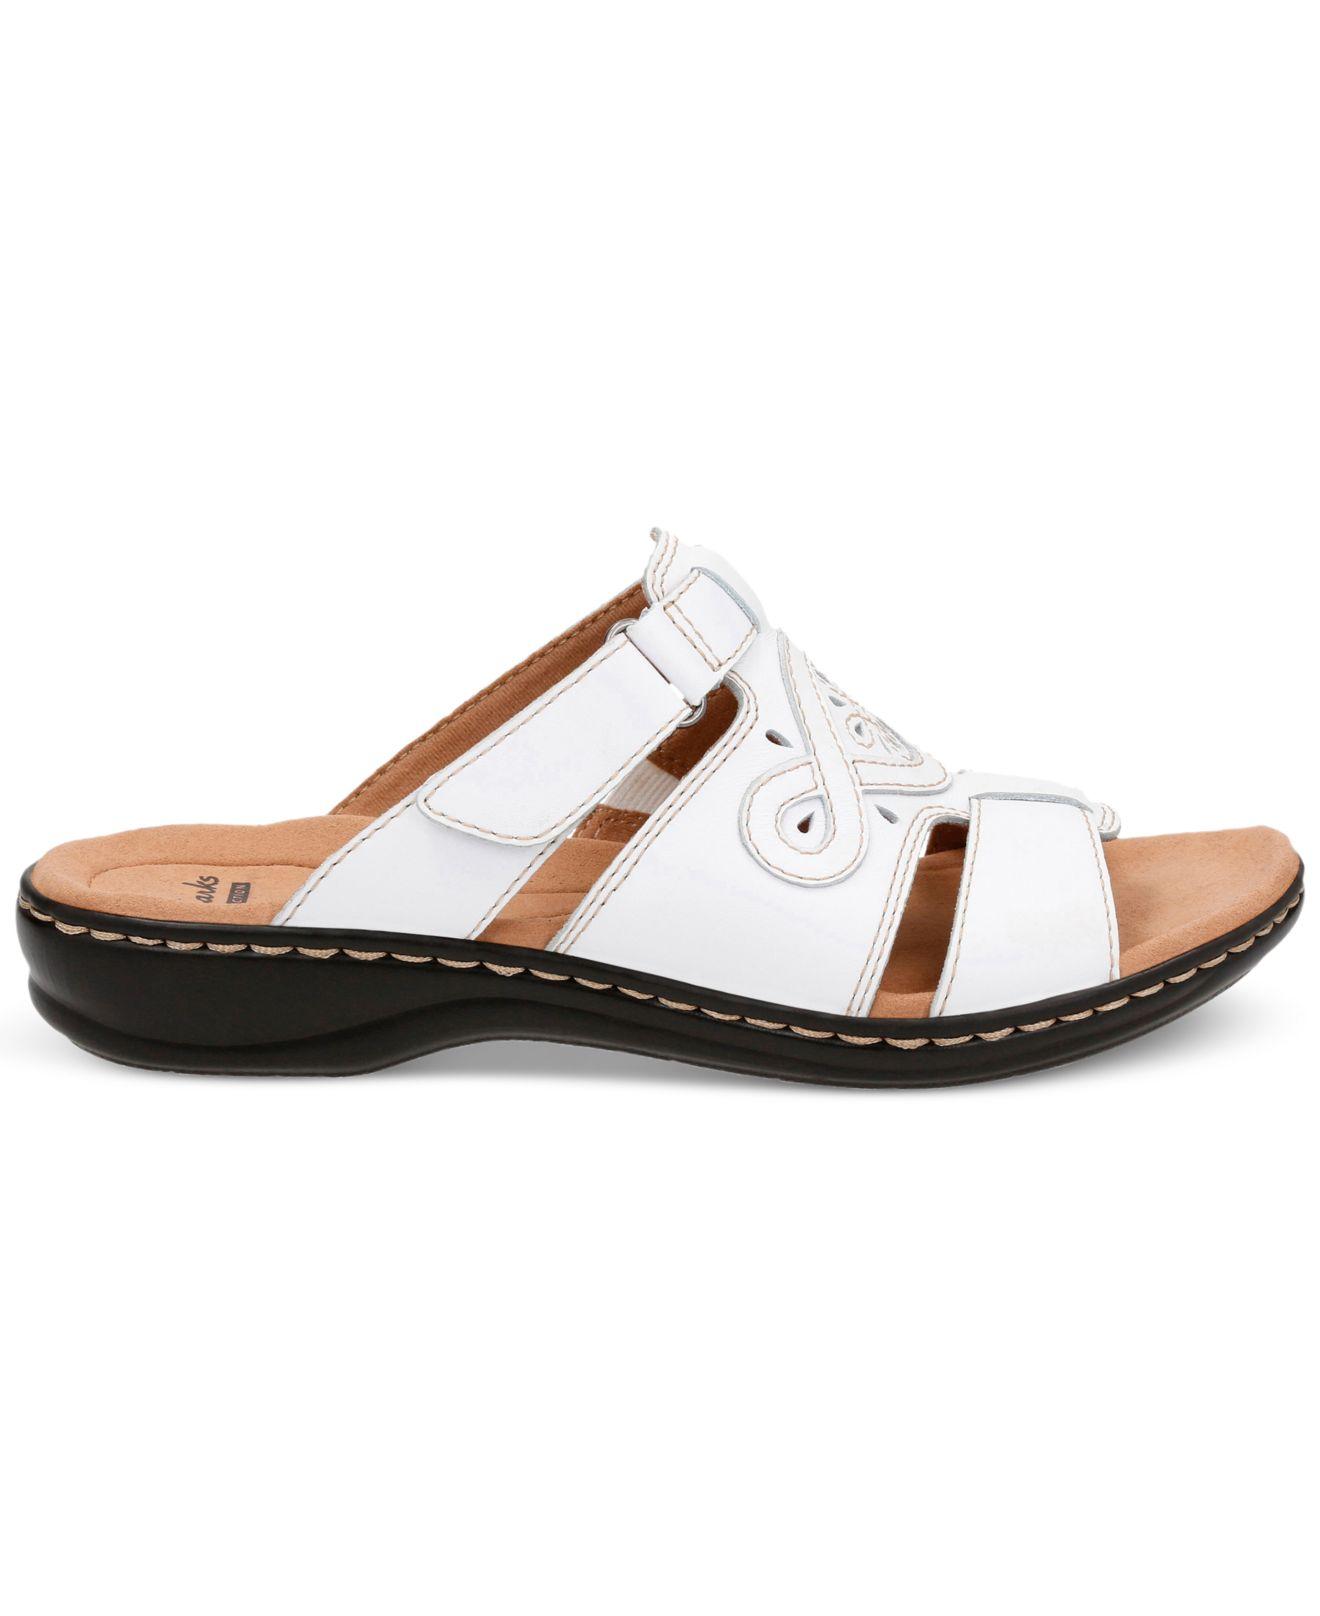 Clarks Leather Women's Leisa Higley Flat Sandals in White - Lyst